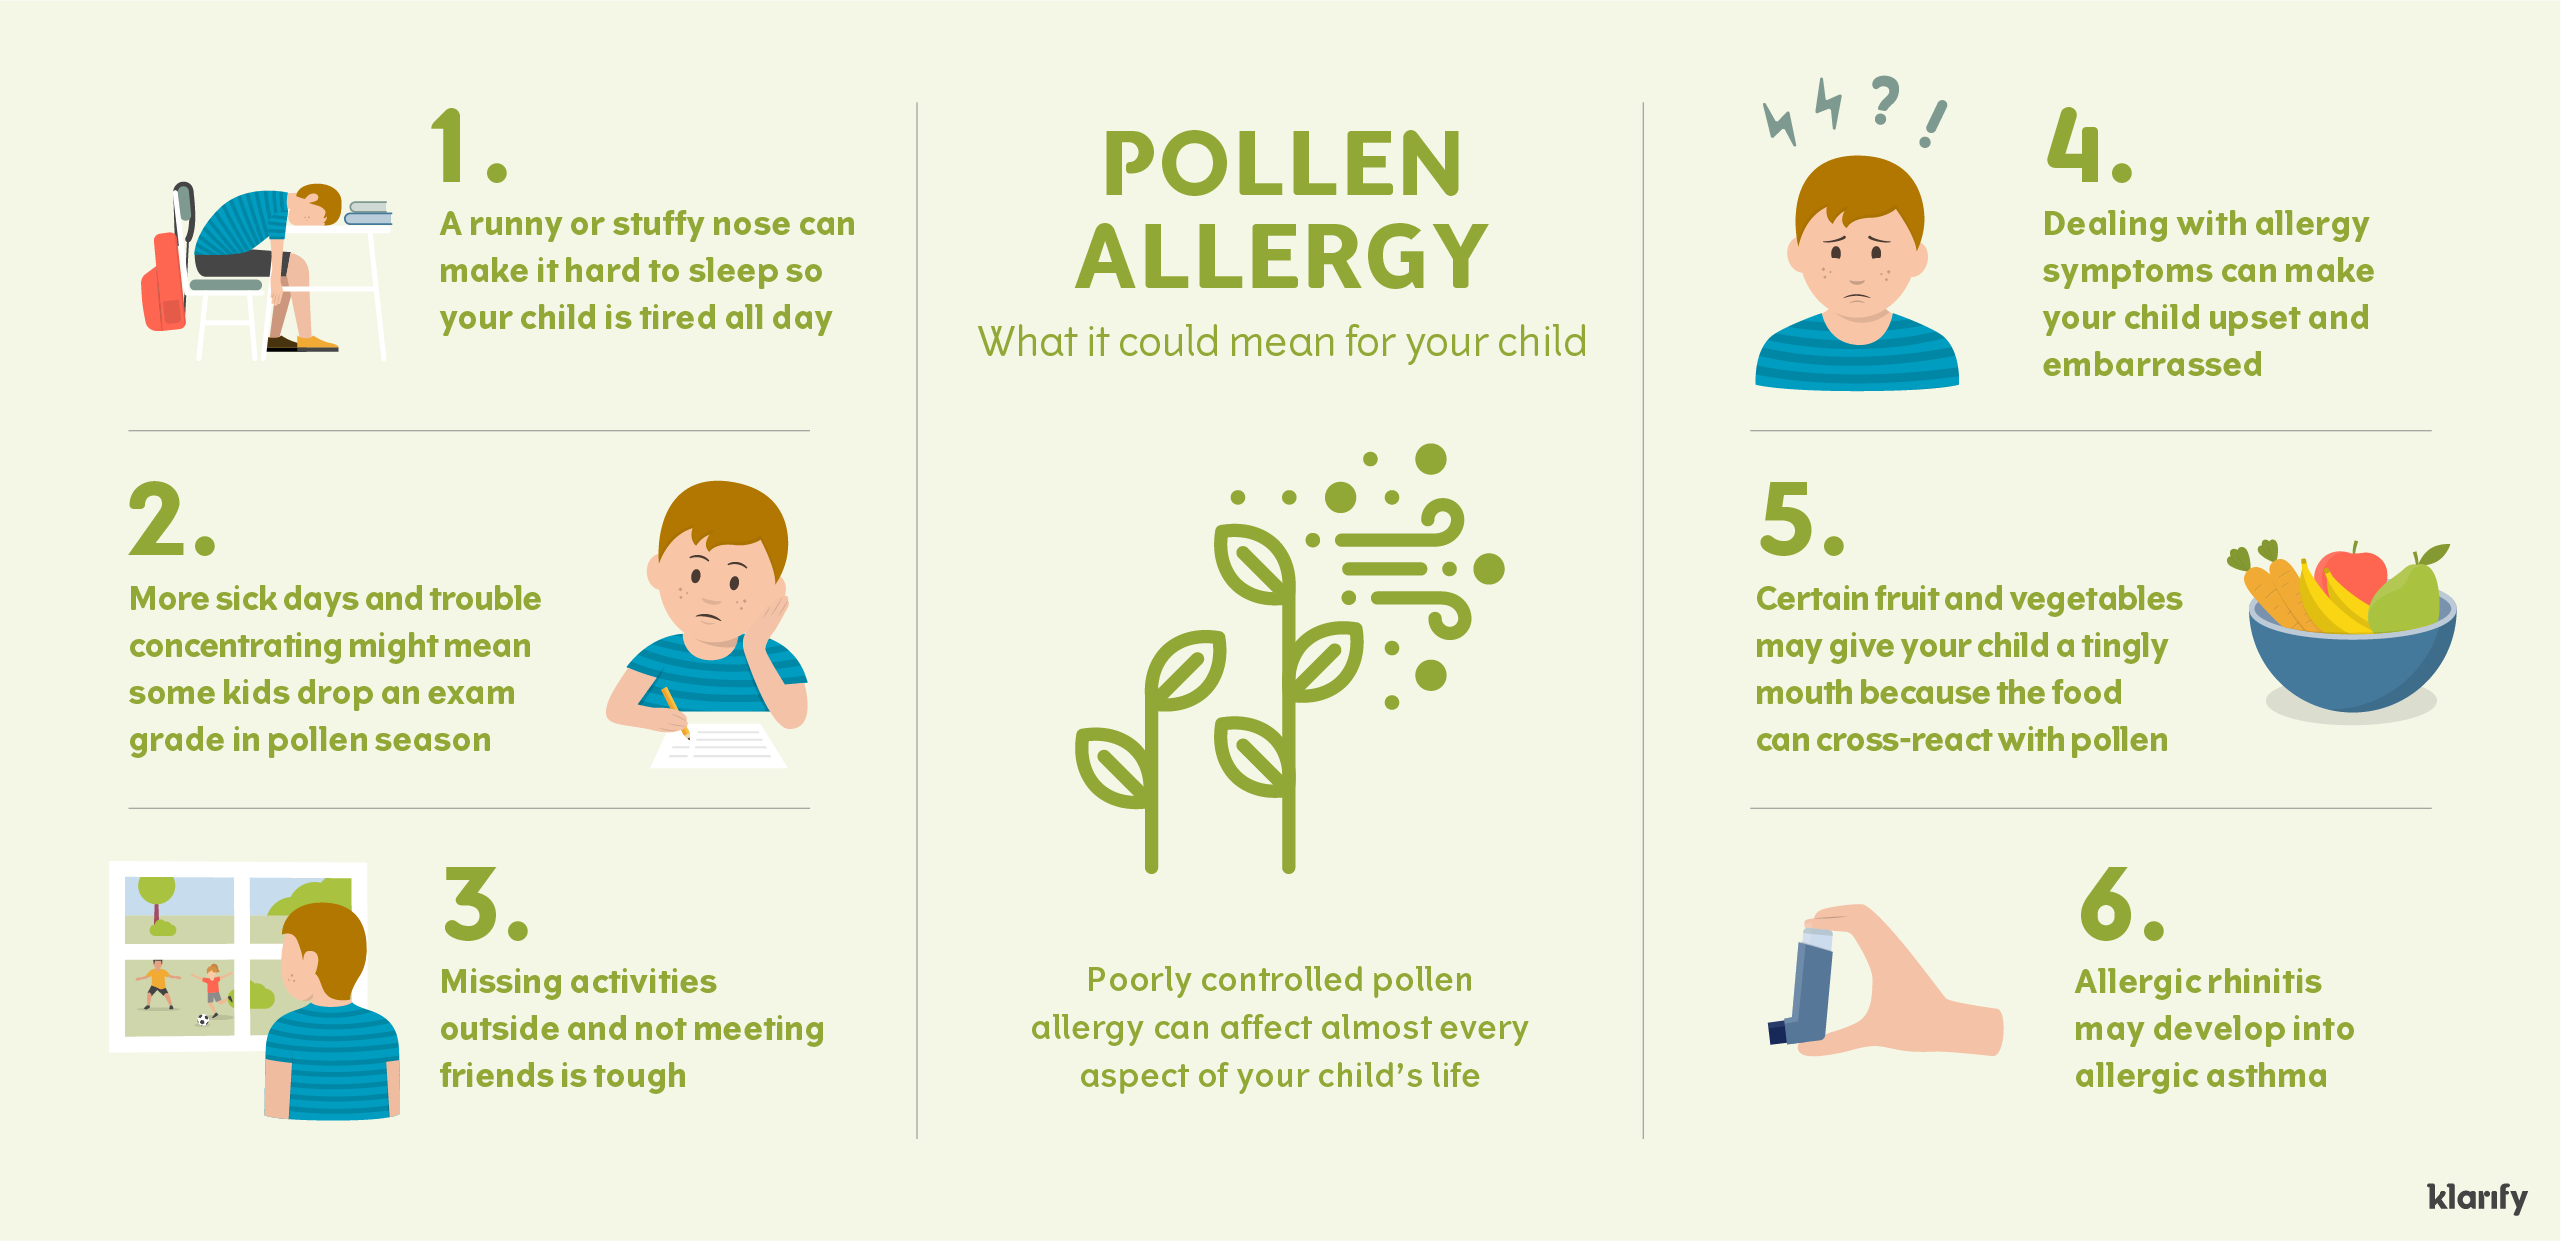 Infographic about the impact of pollen allergy on children. Details of the infographic listed below